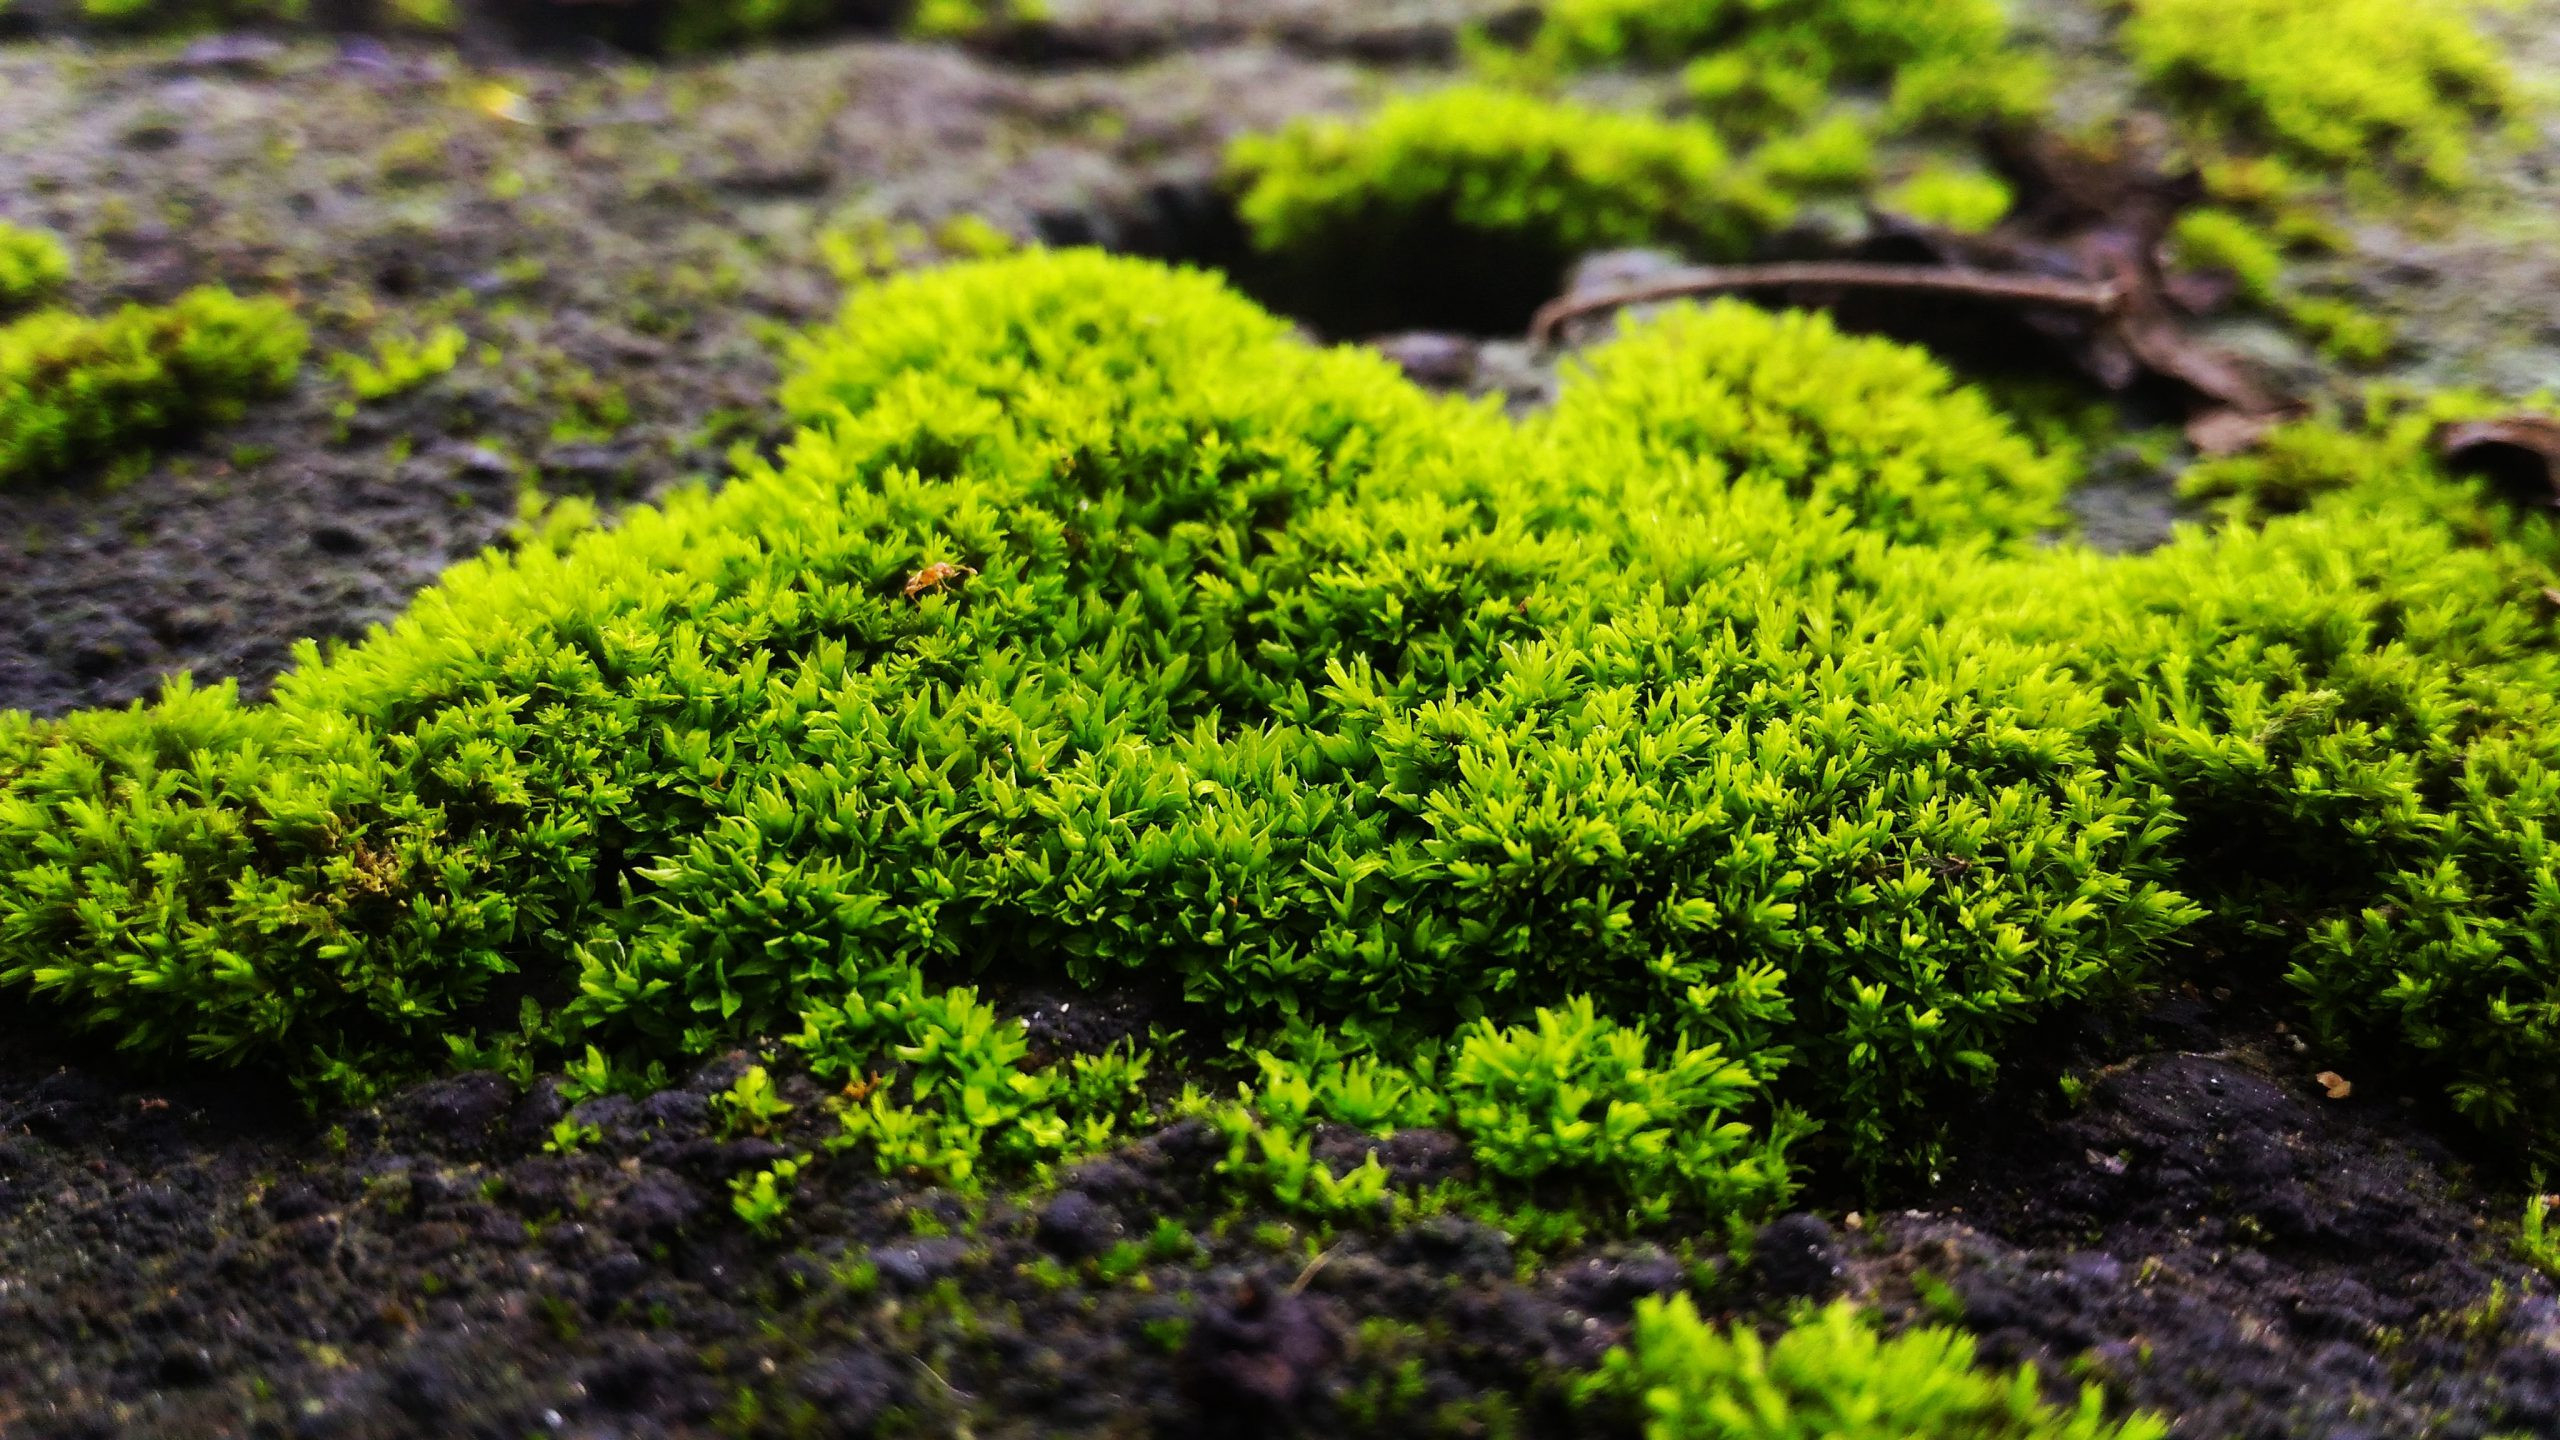 Peat Moss Vs. Sphagnum Moss: Are They The Same? - Plants Spark Joy